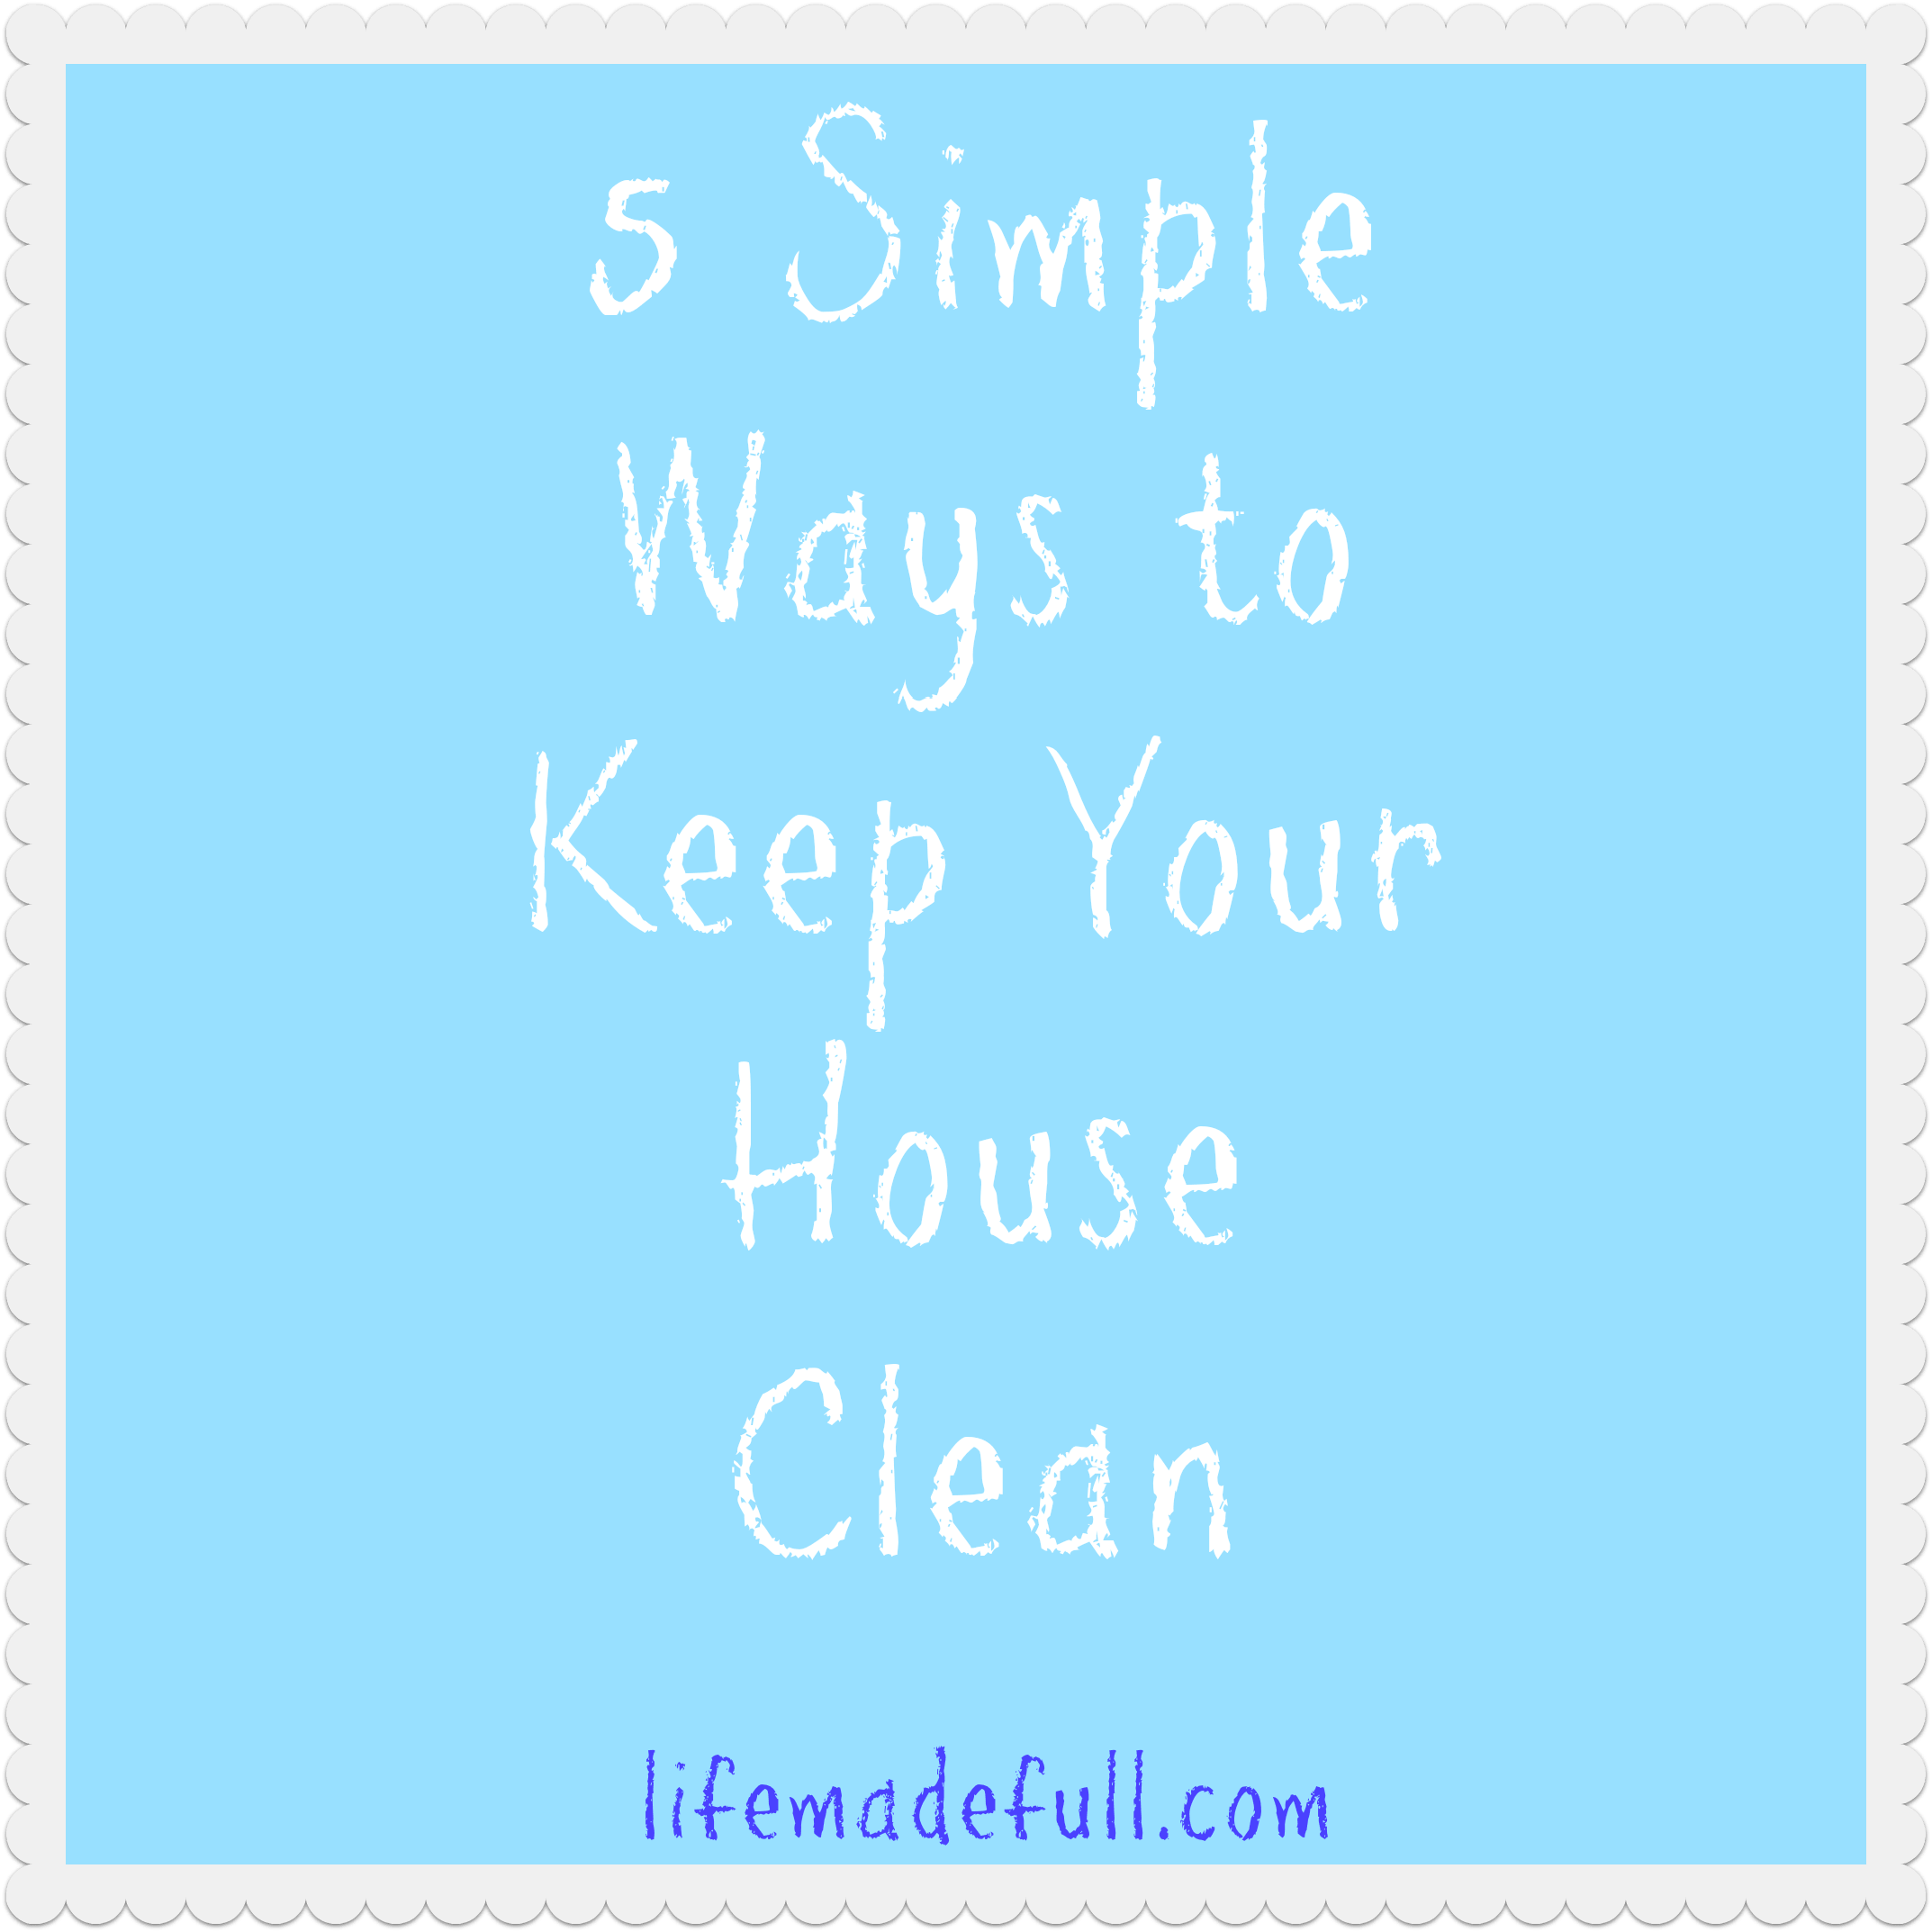 5 Simple Ways to Keep Your House Clean